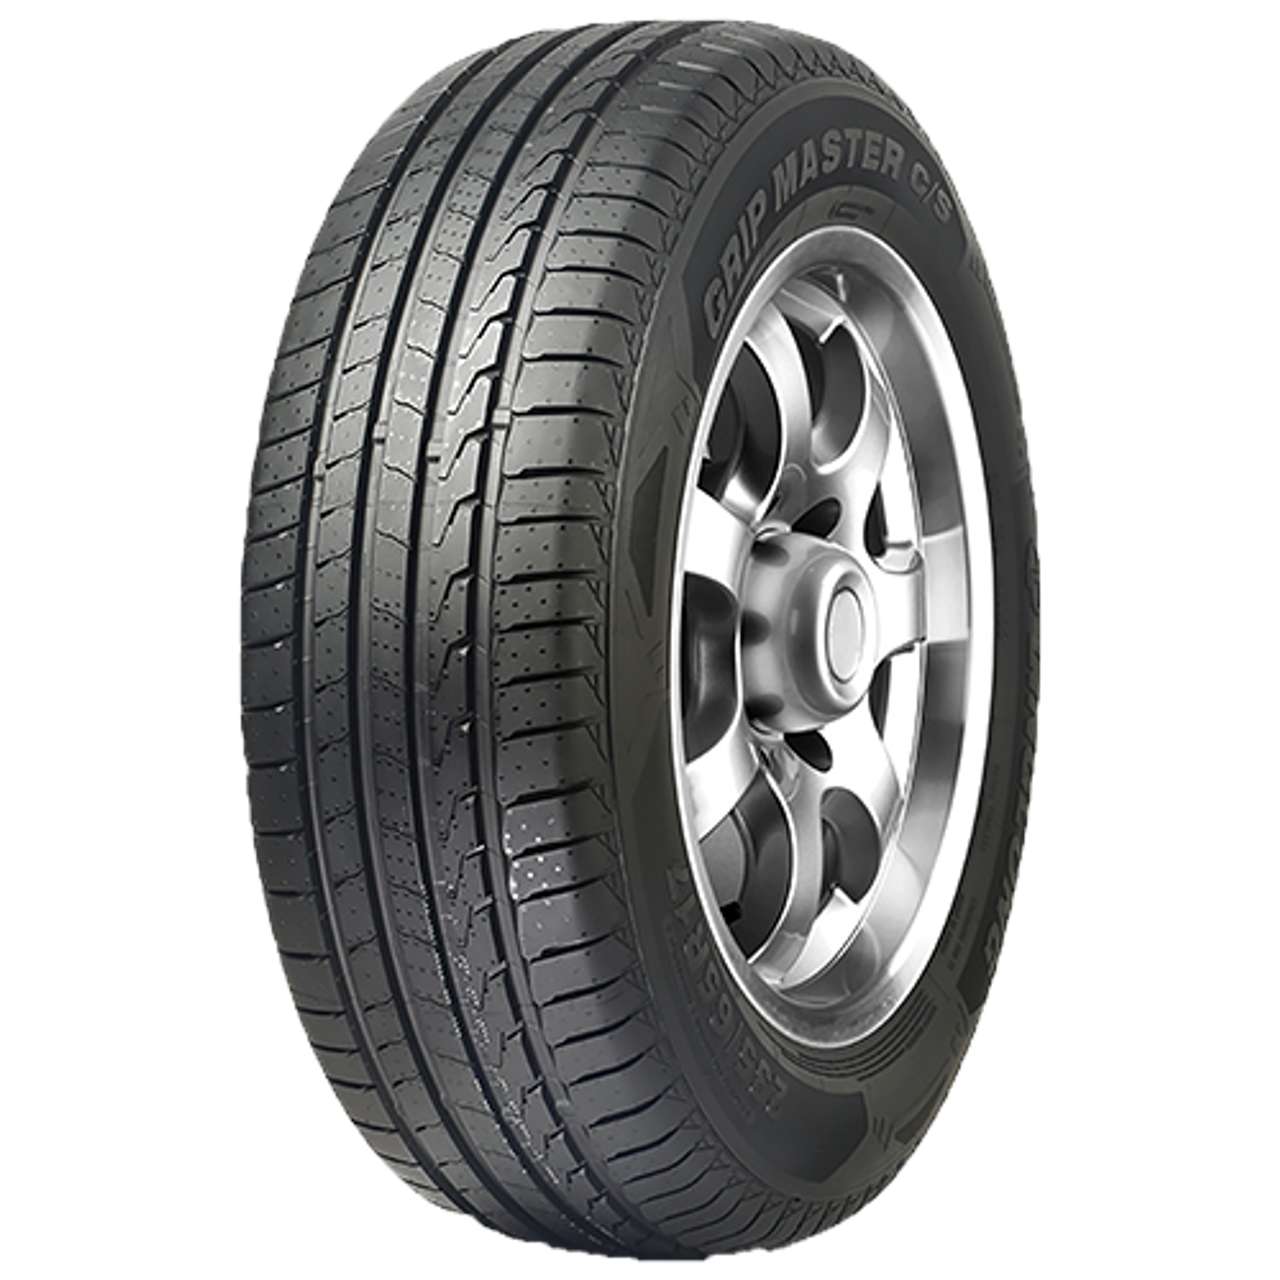 LINGLONG GRIP MASTER C/S 235/60R18 107W BSW XL